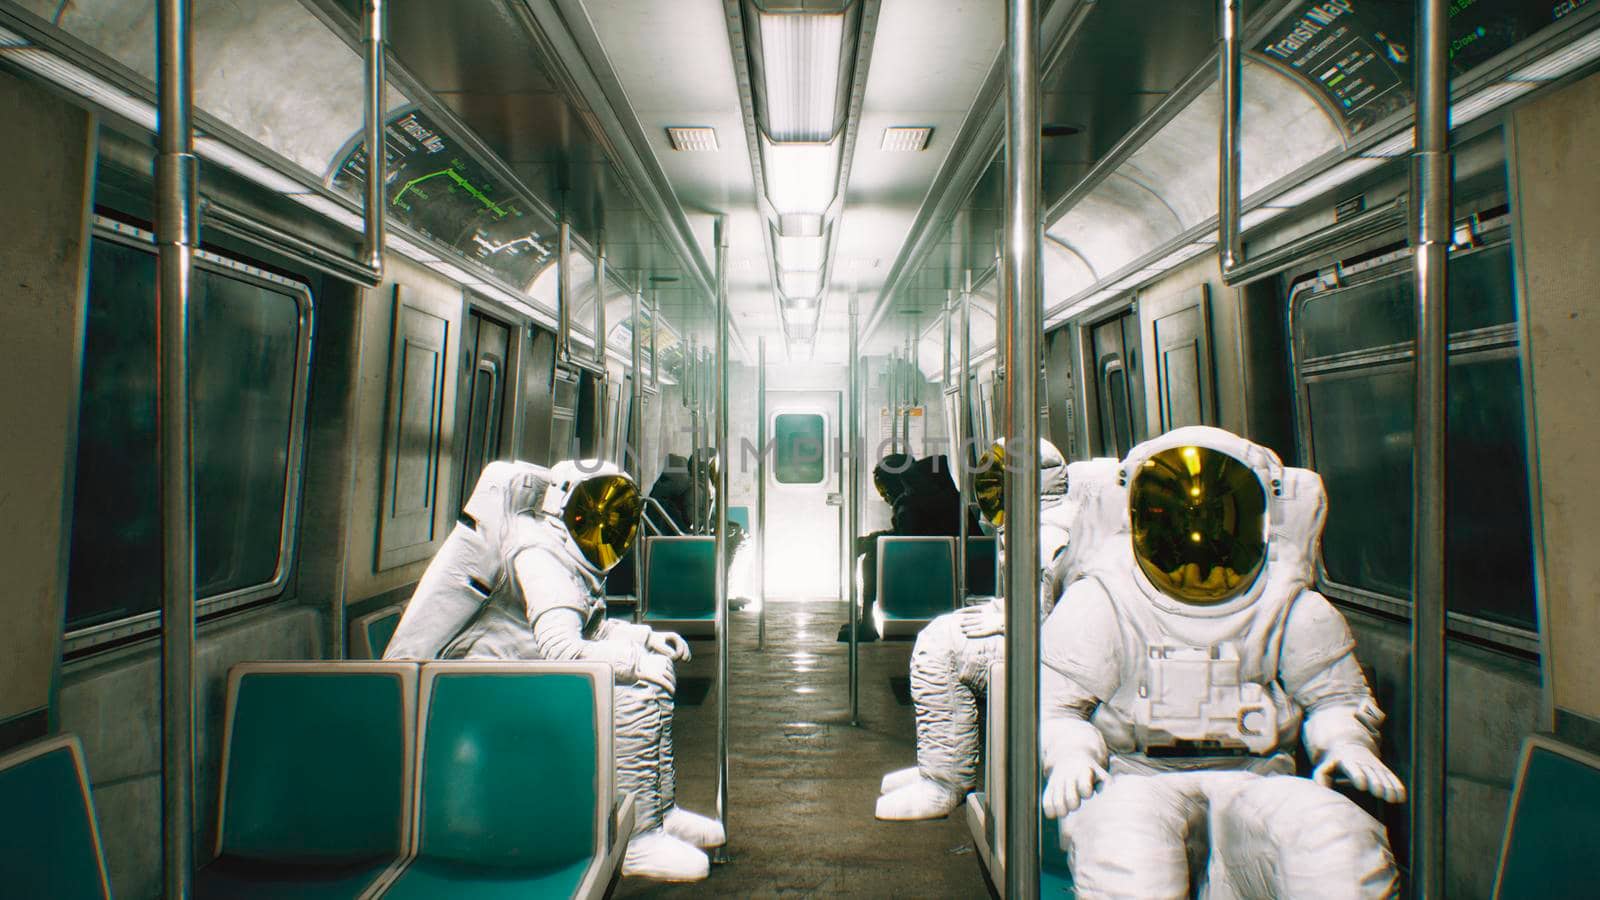 Astronauts go to work in the train. Abstract cosmic fantasy.